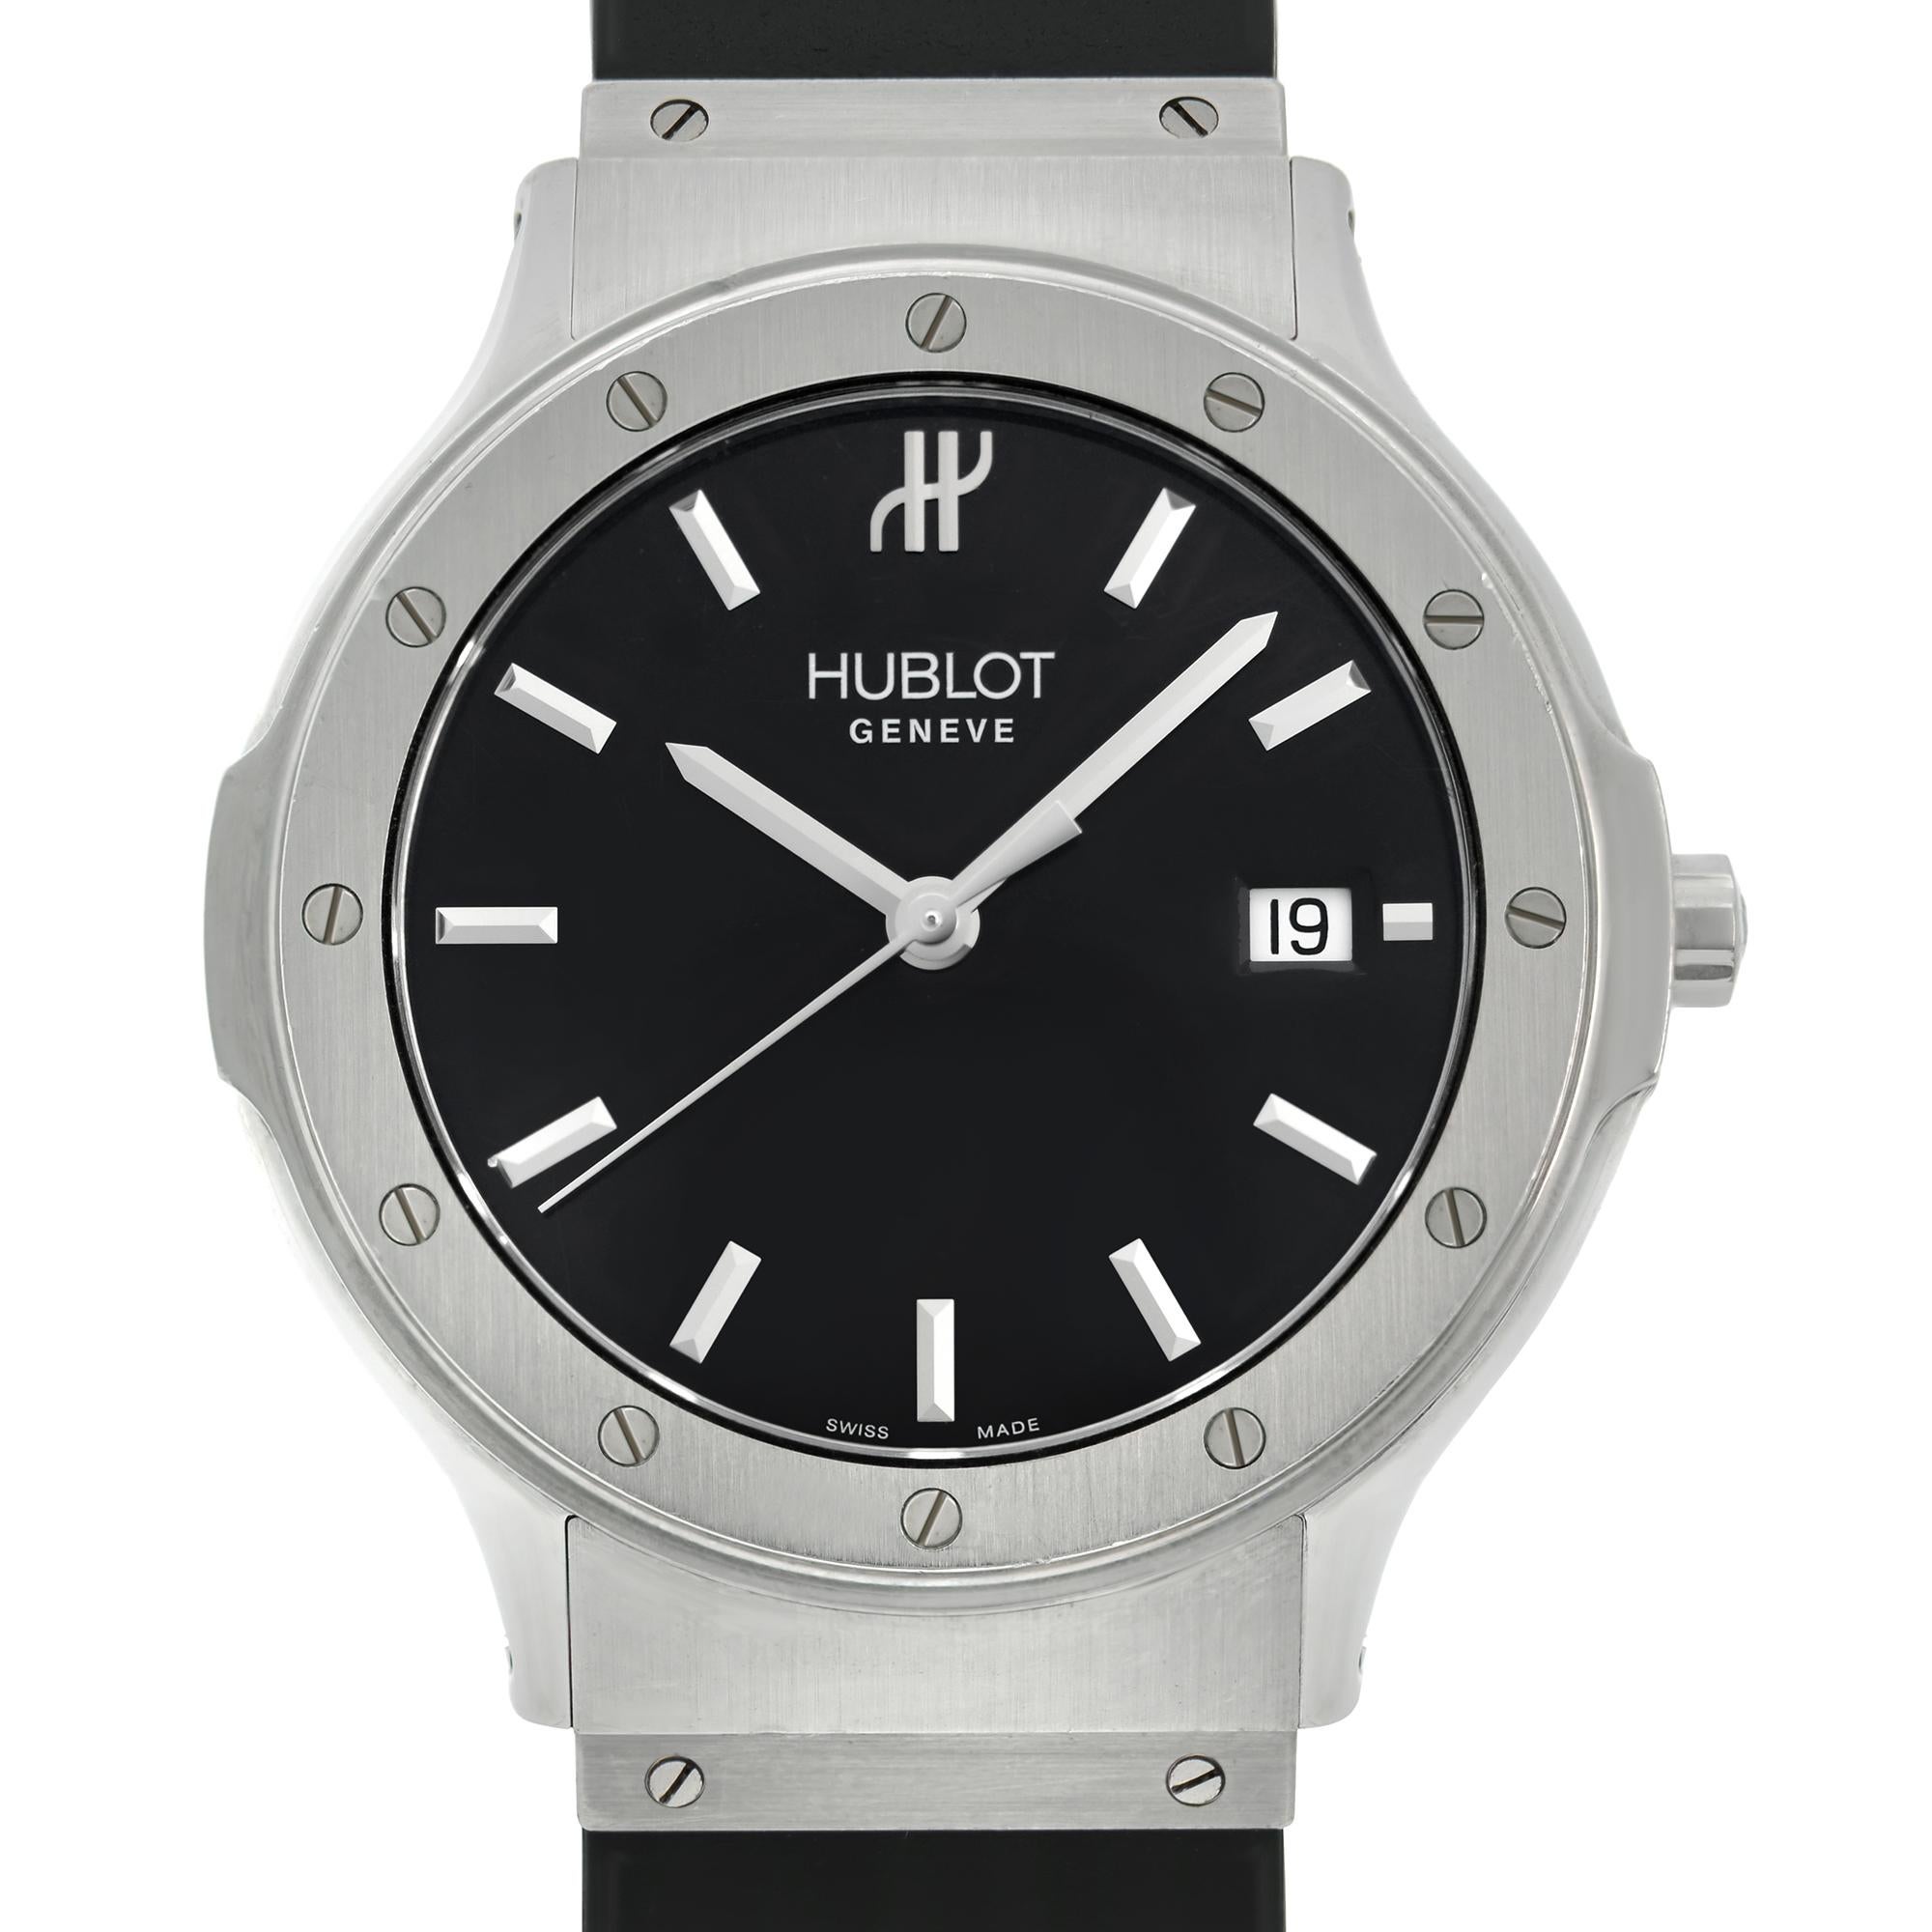 Pre-owned Hublot Classic Fusion 36mm Stainless Steel Black Dial Quartz Men's Watch. No Original Box and Papers are Included. Comes with Chronostore Presentation Box and Authenticity Card. Covered by 1-year Chronostore Warranty.
Details:
Brand